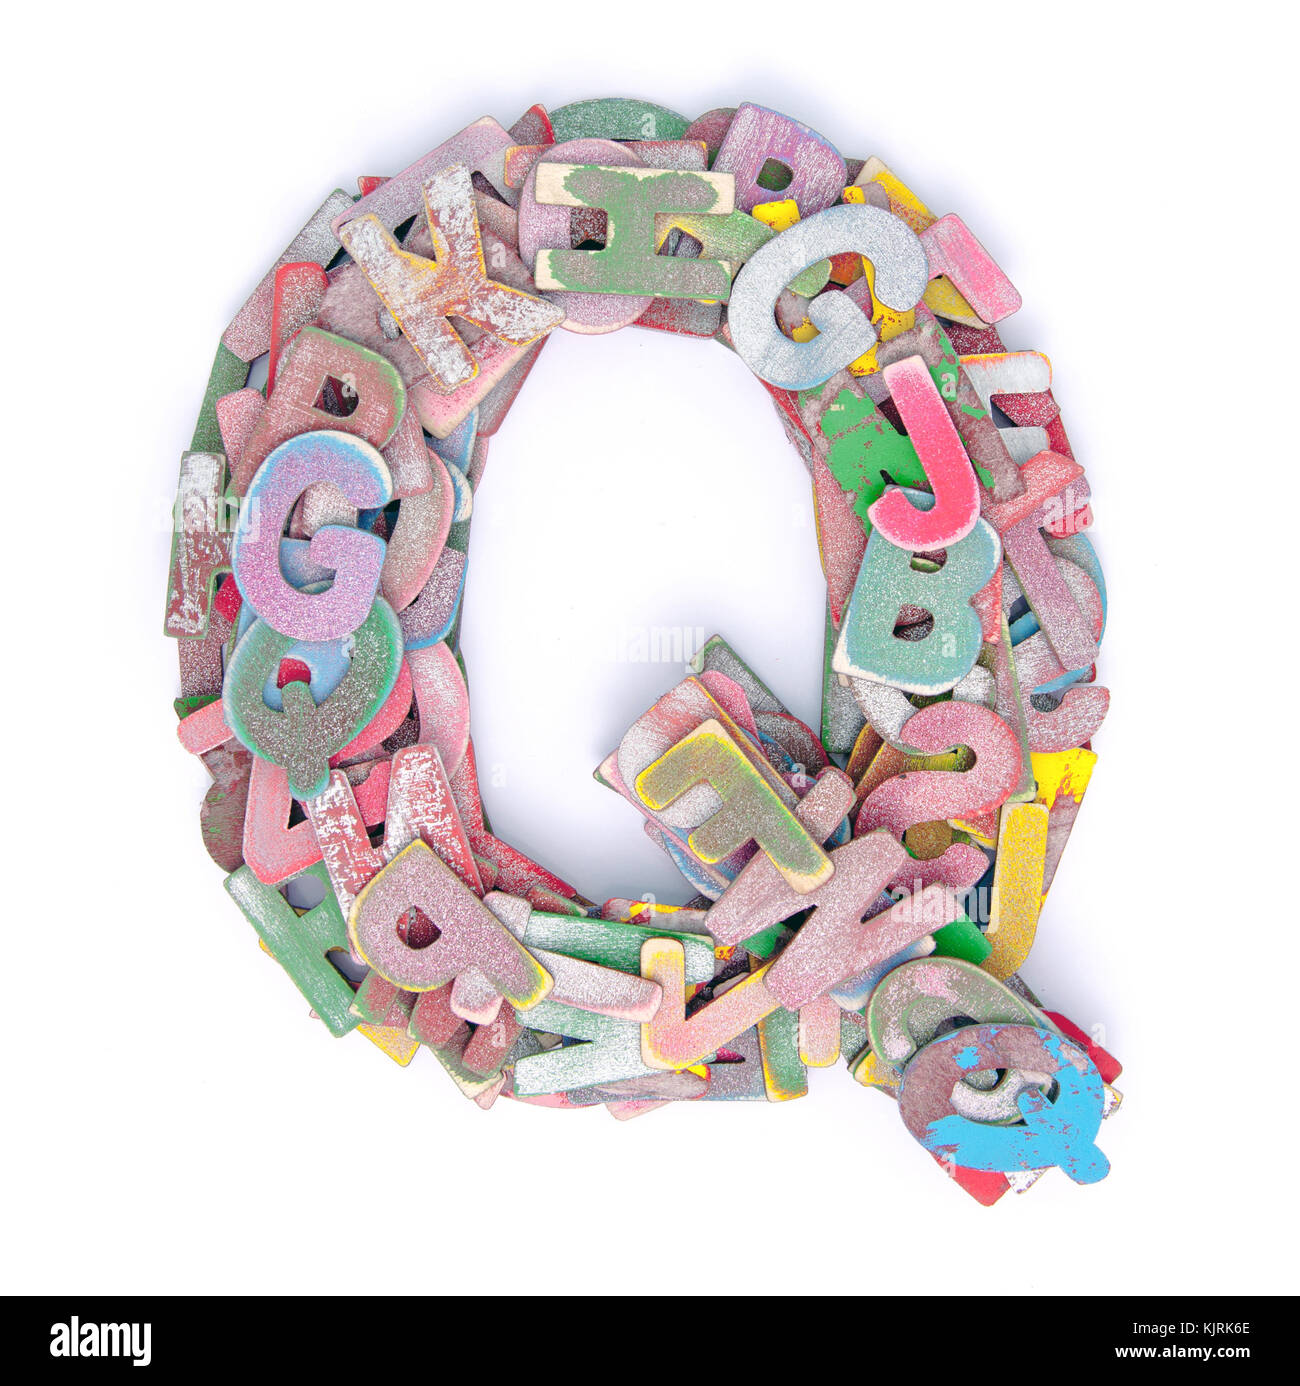 lots of small wooden letters to make up the letter Q Stock Photo